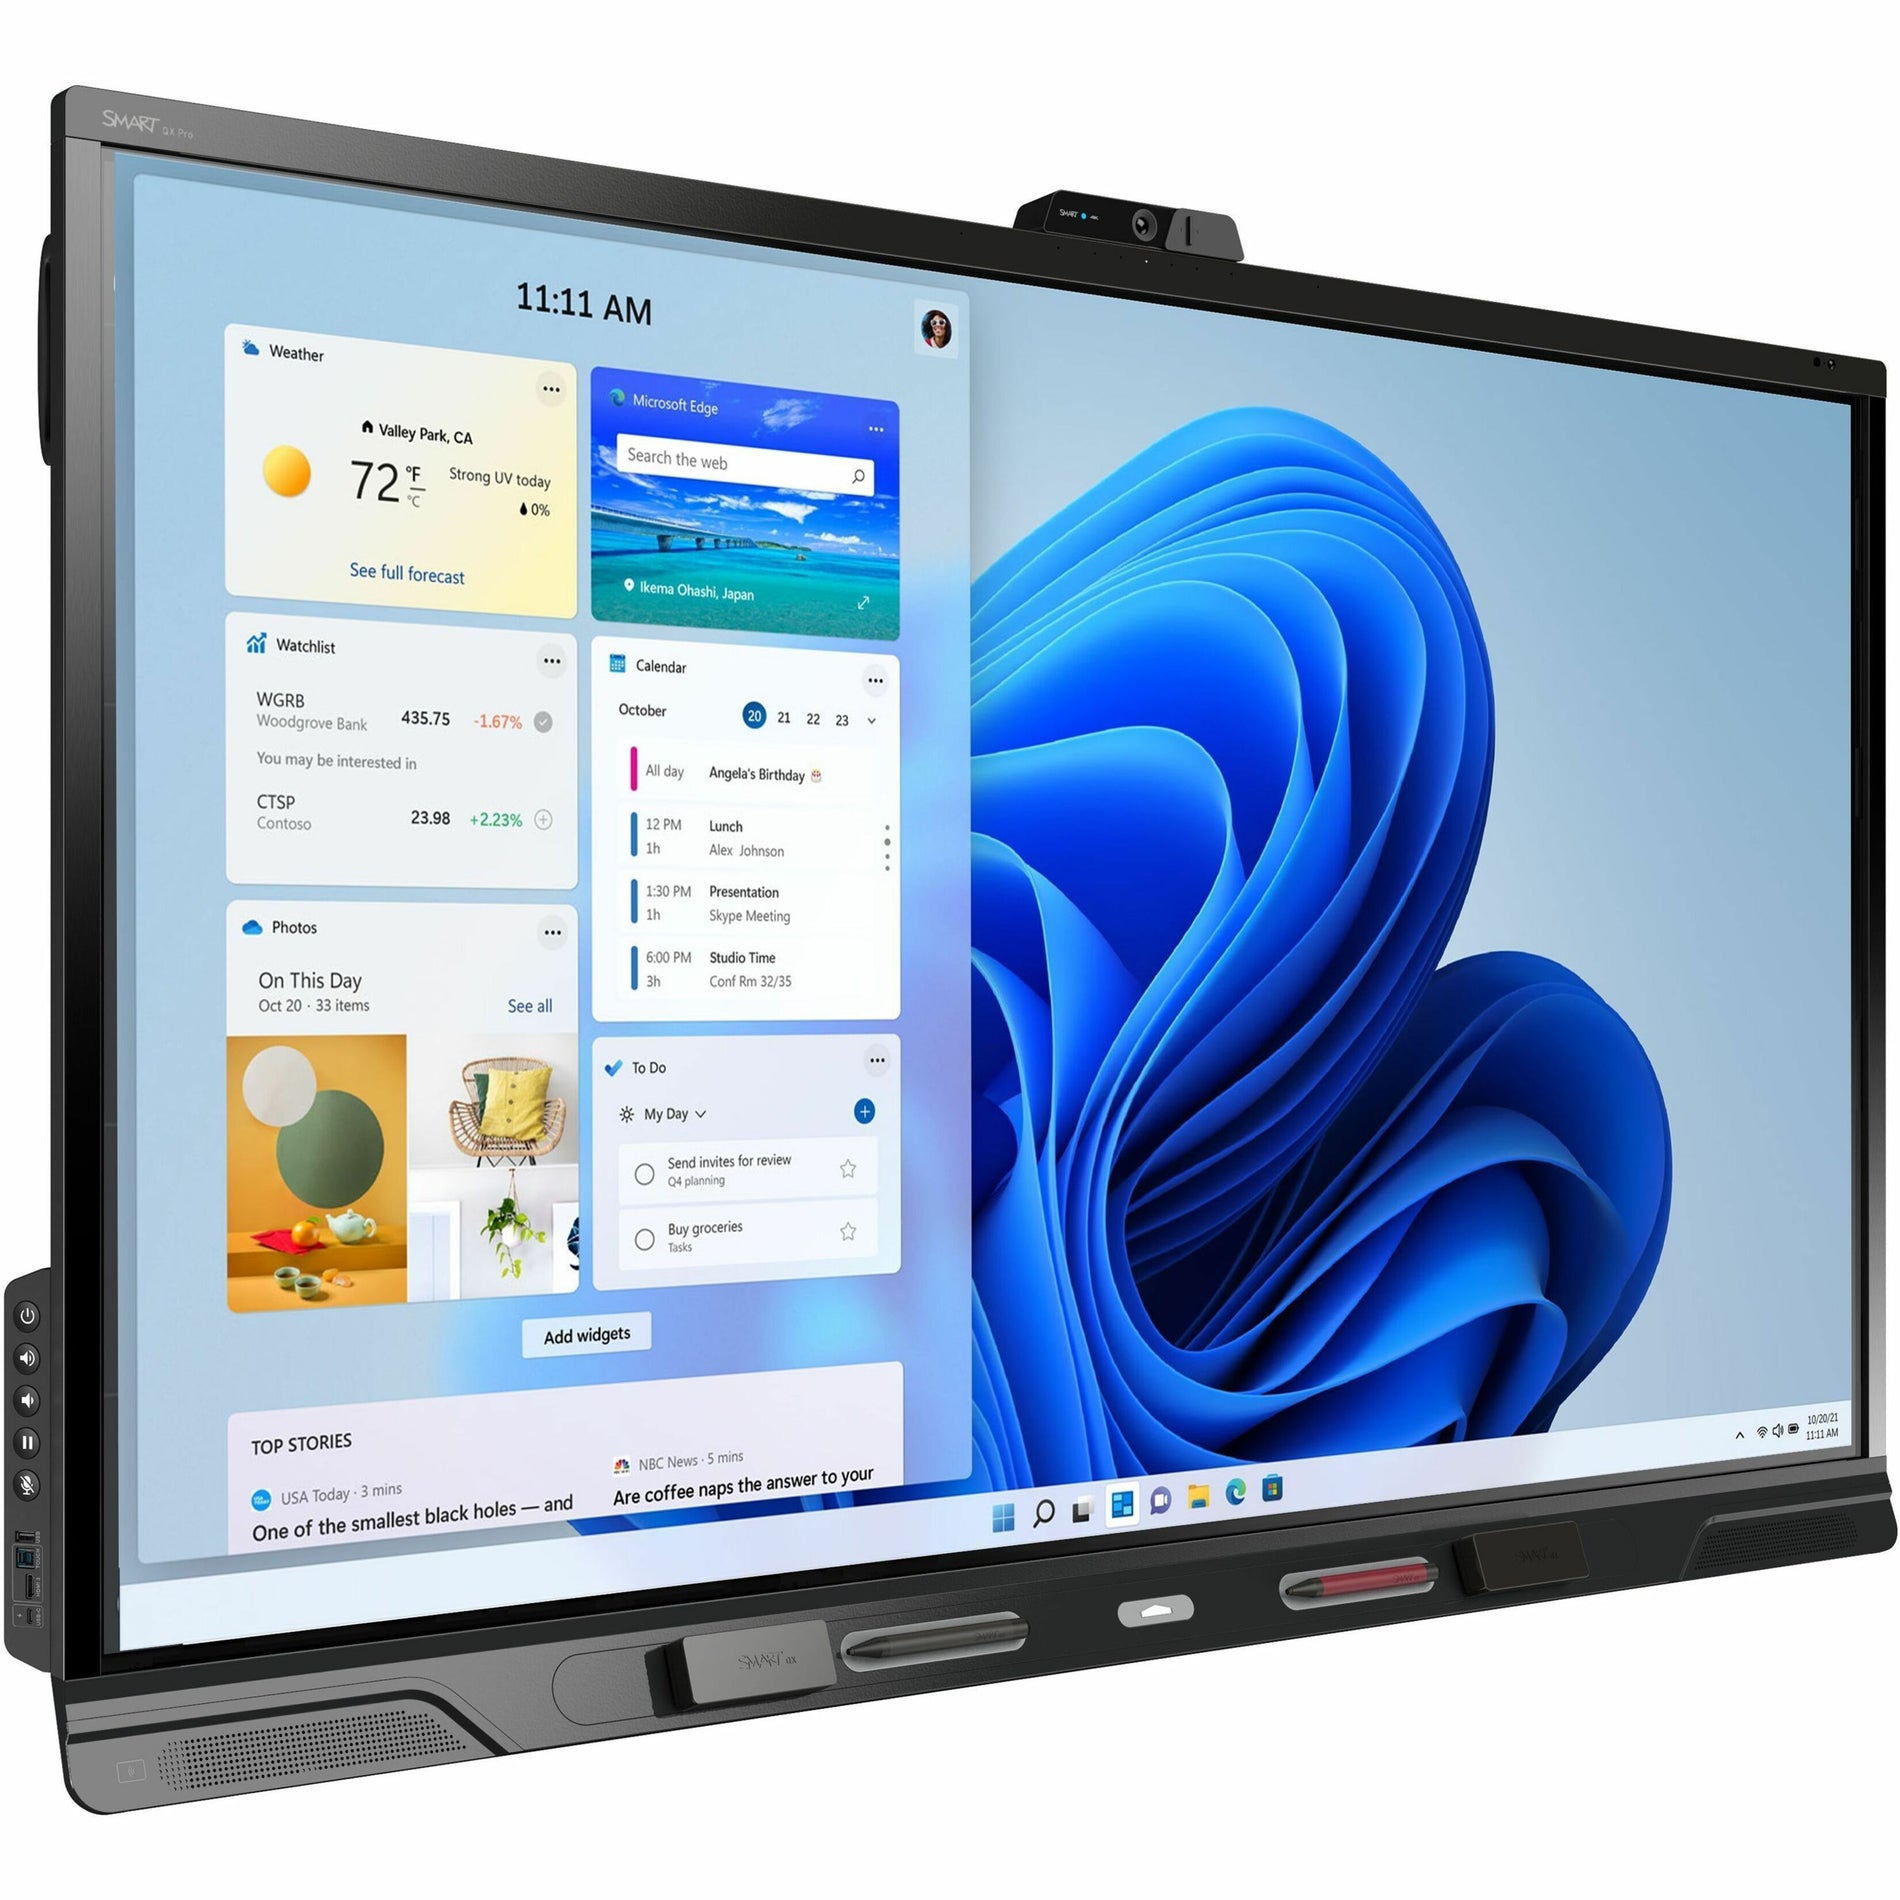 SMART SBID-QX275-P QX075-P Interactive Display with iQ, 75" Multi-touch Screen, Android 11, Energy Star